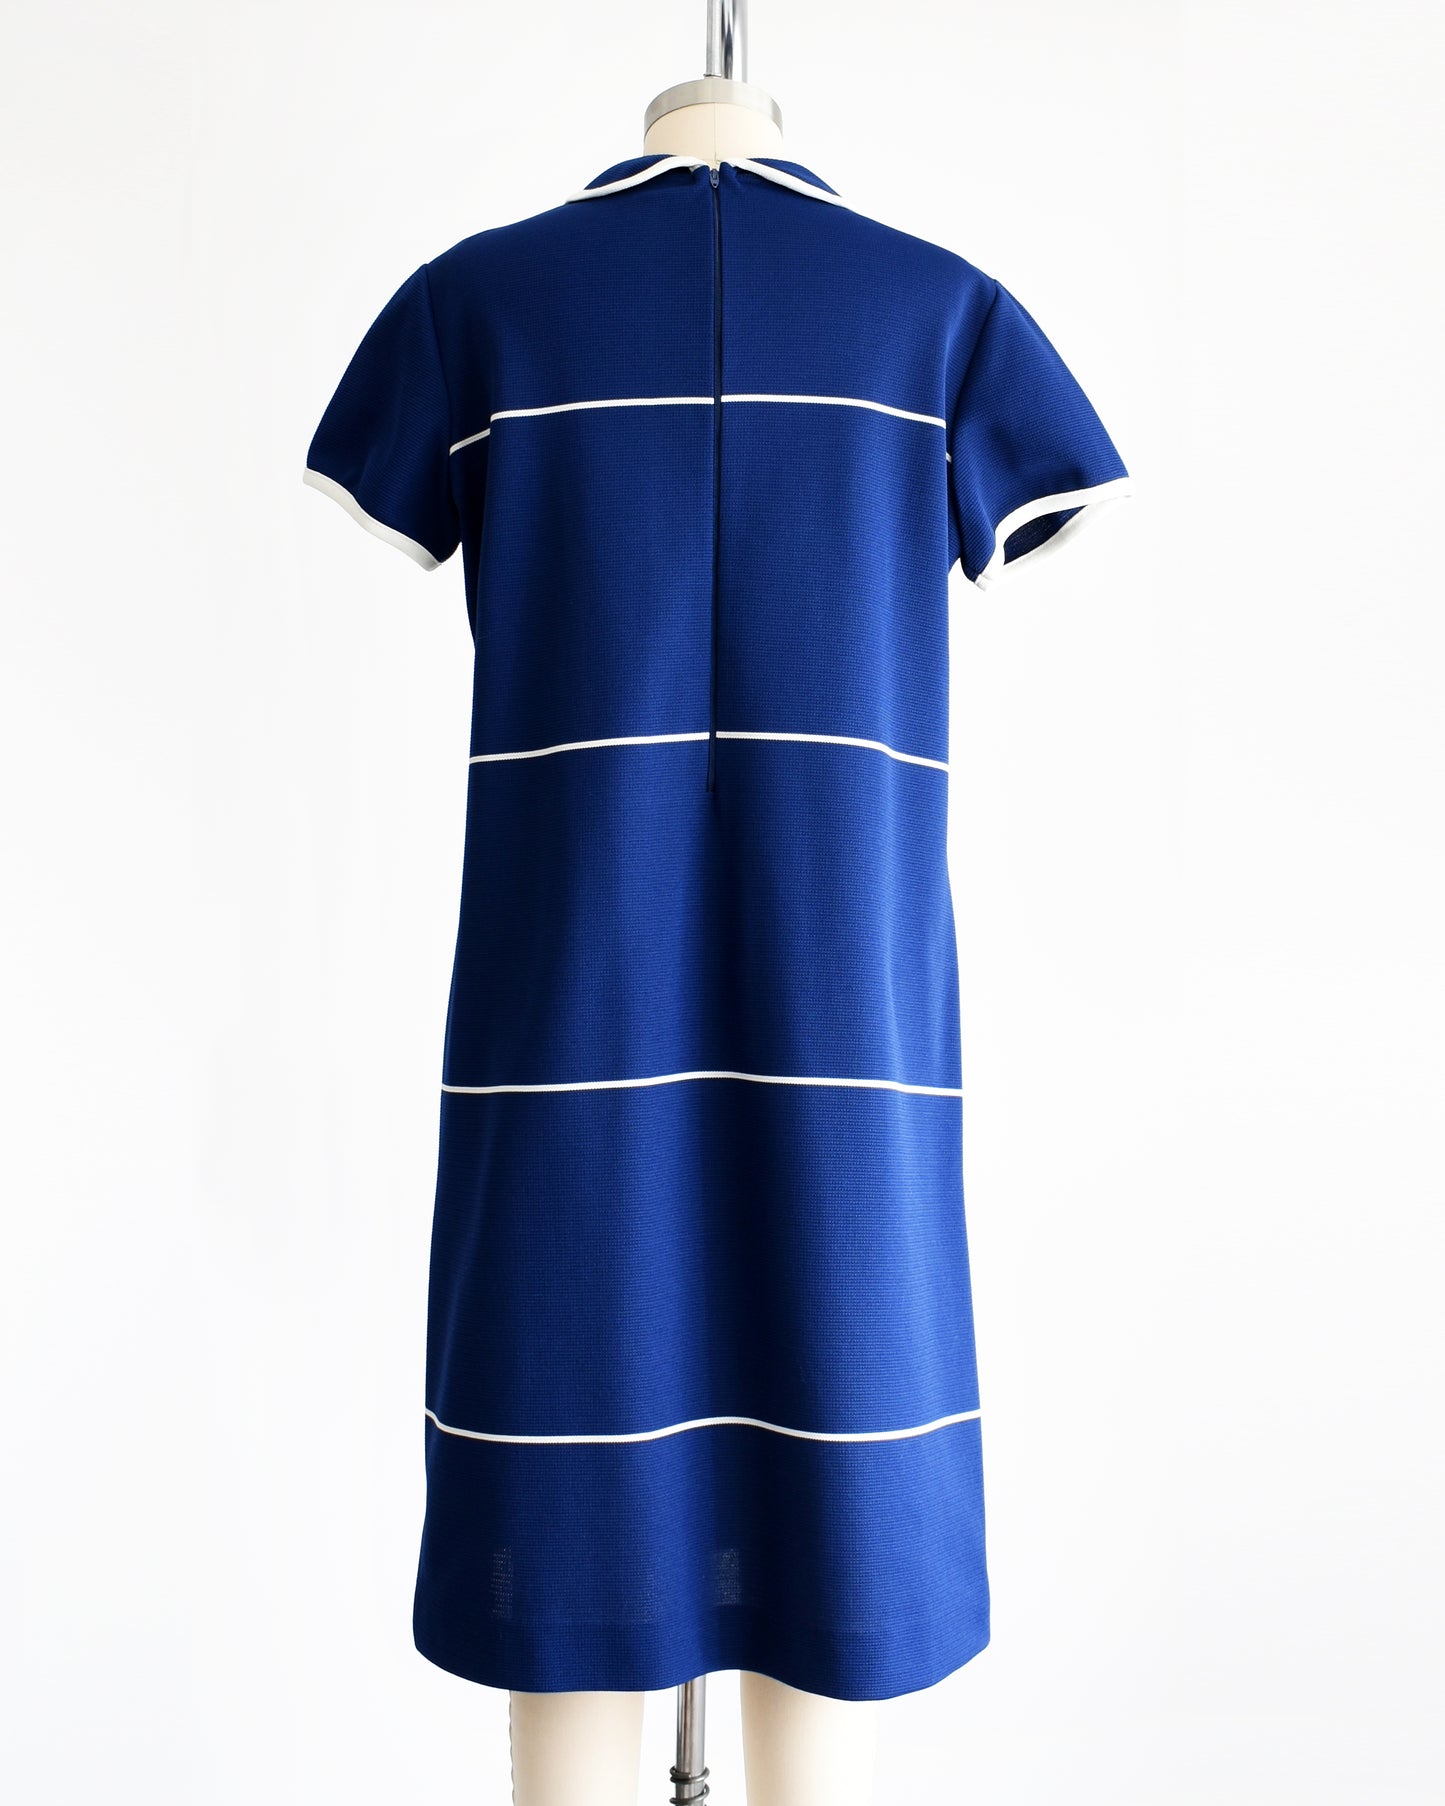 Back view of a vintage 1960s navy blue dress with horizontal white stripes and a zipper up the back